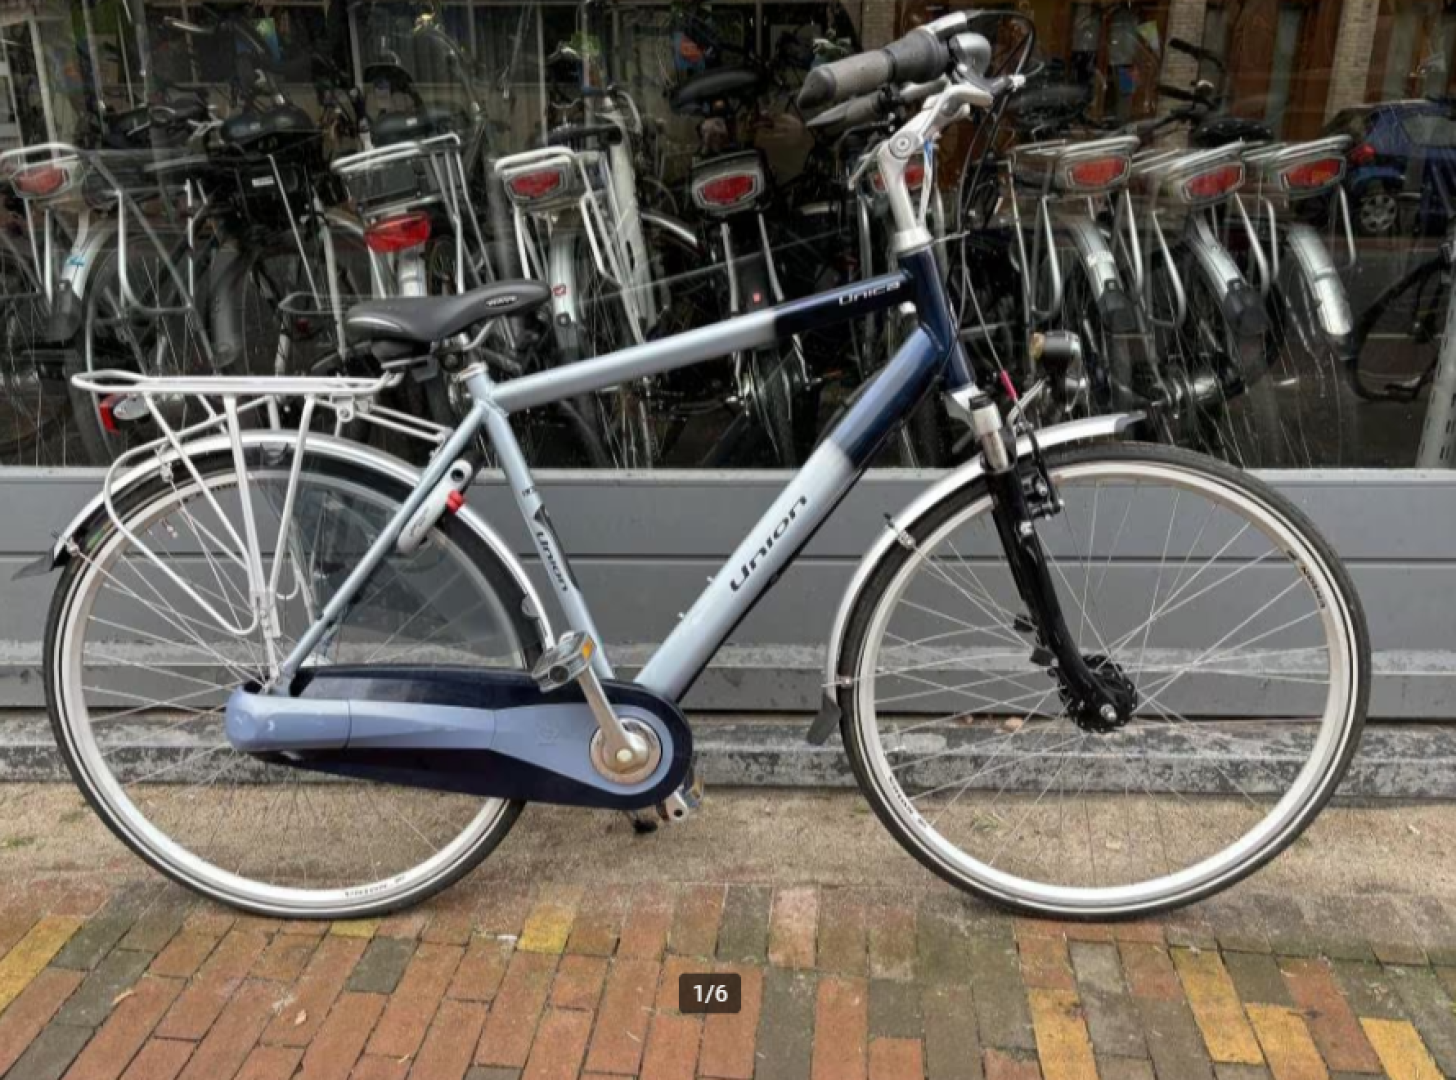 Union herenfiets 185.-